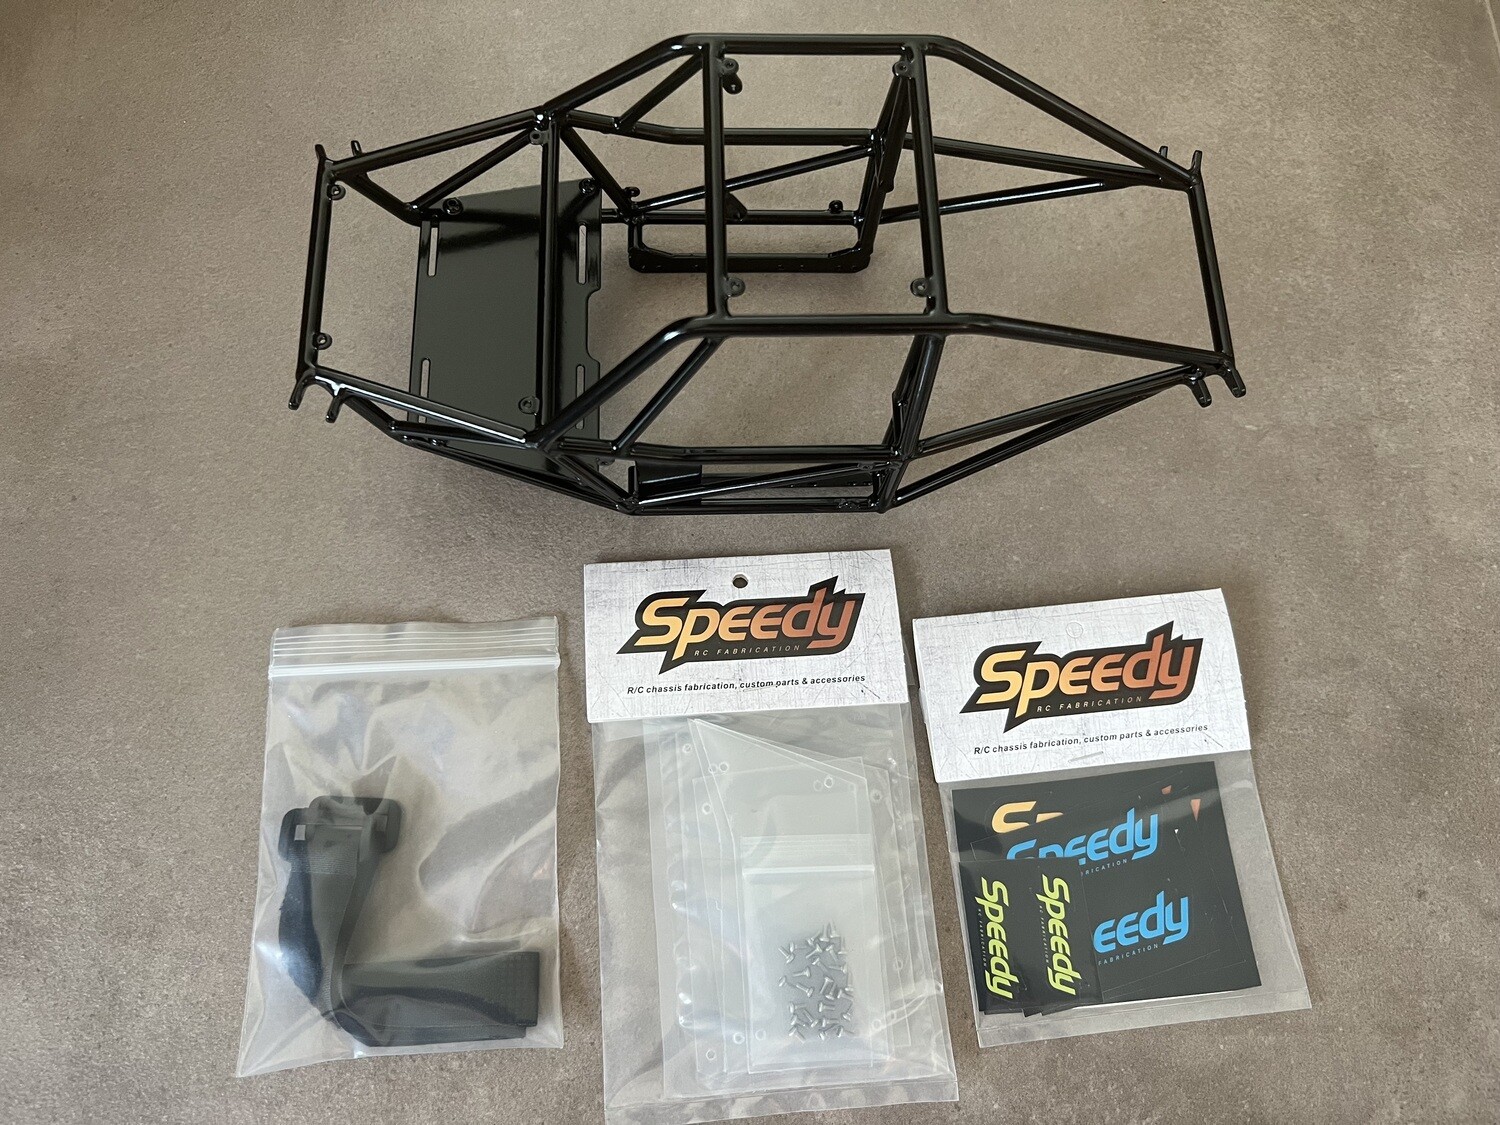 Titanium R2 Moon Buggy chassis bundle set (Ready to ship)